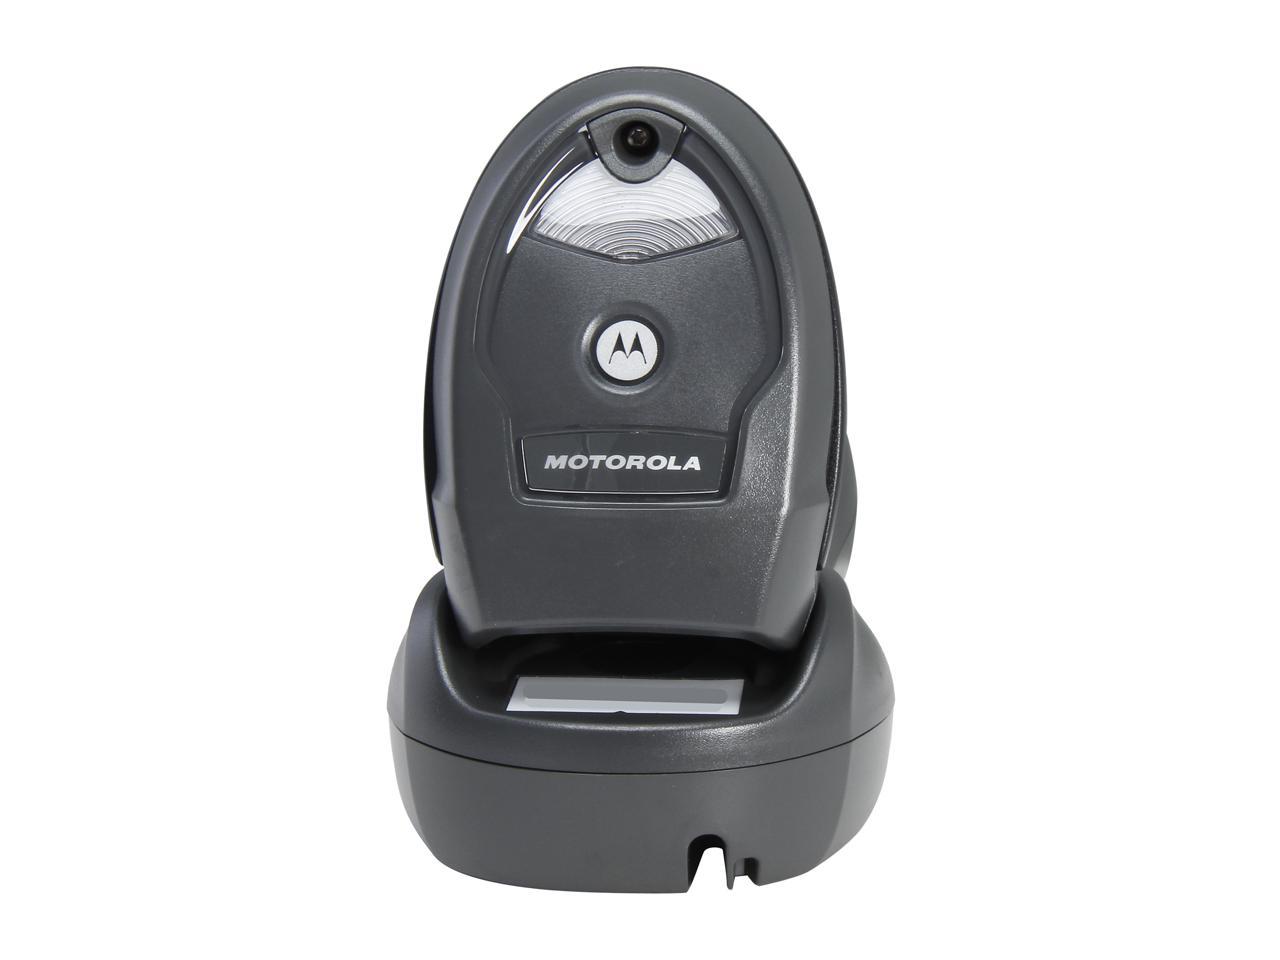 LI4278 Wireless 1D Barcode Scanner Zebra Symbol with Cradle and USB Cable Formerly Motorola Symbol